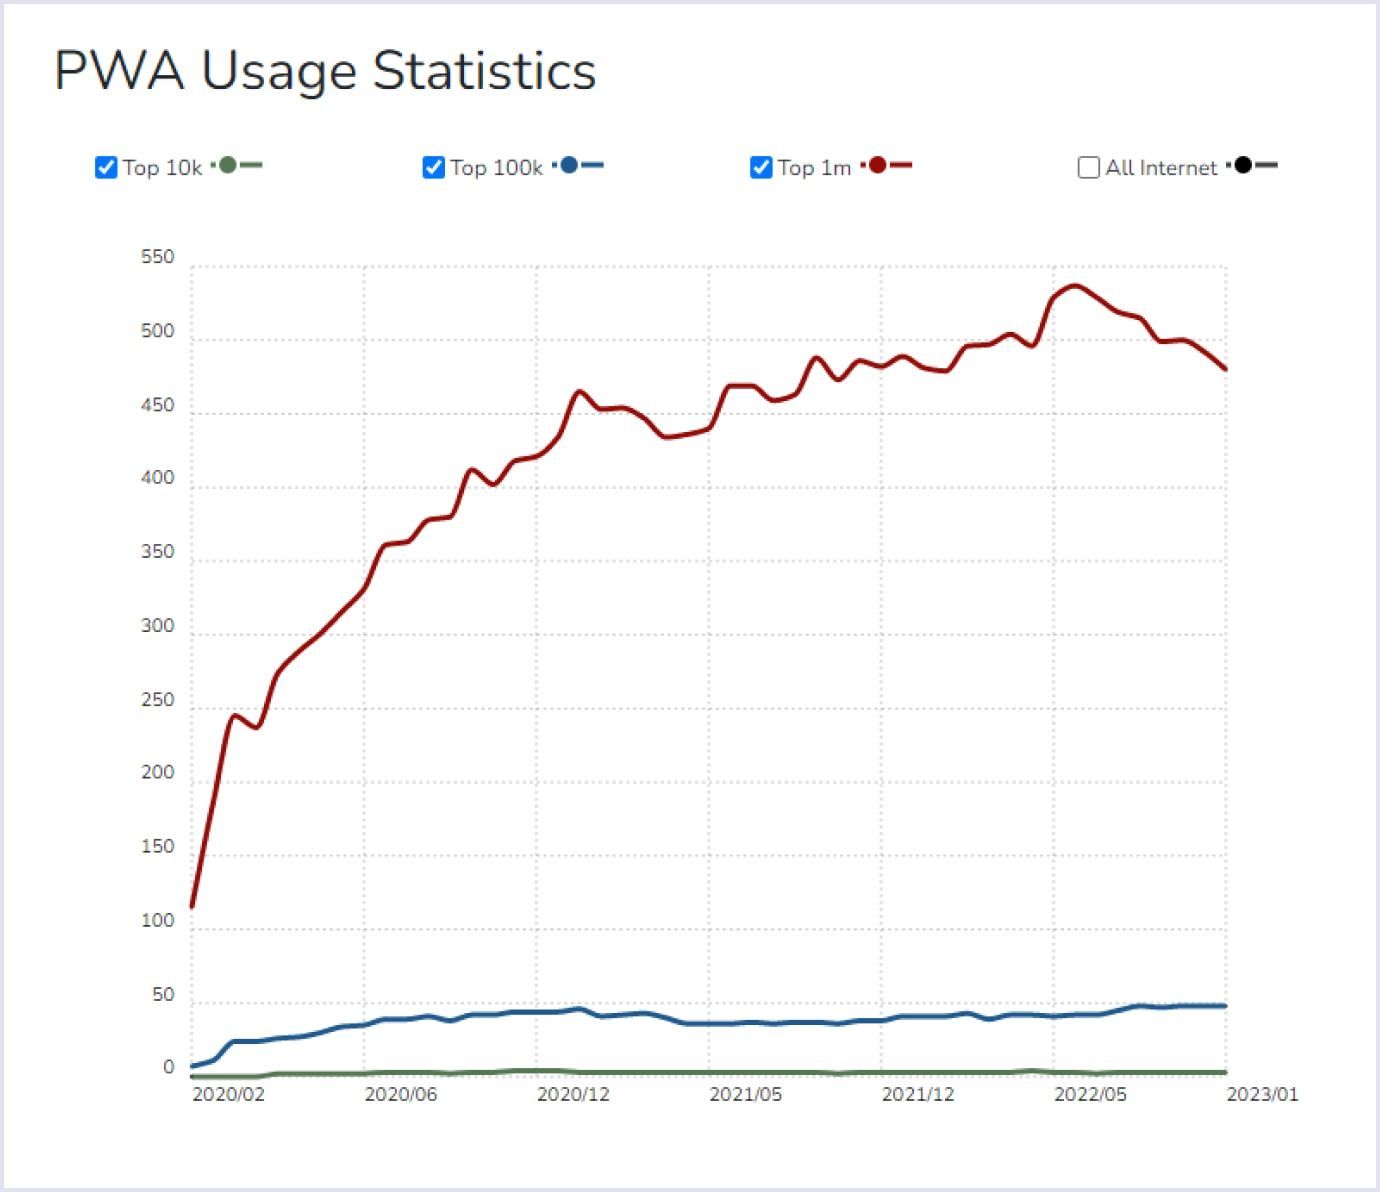 Statistical overview of PWA usage